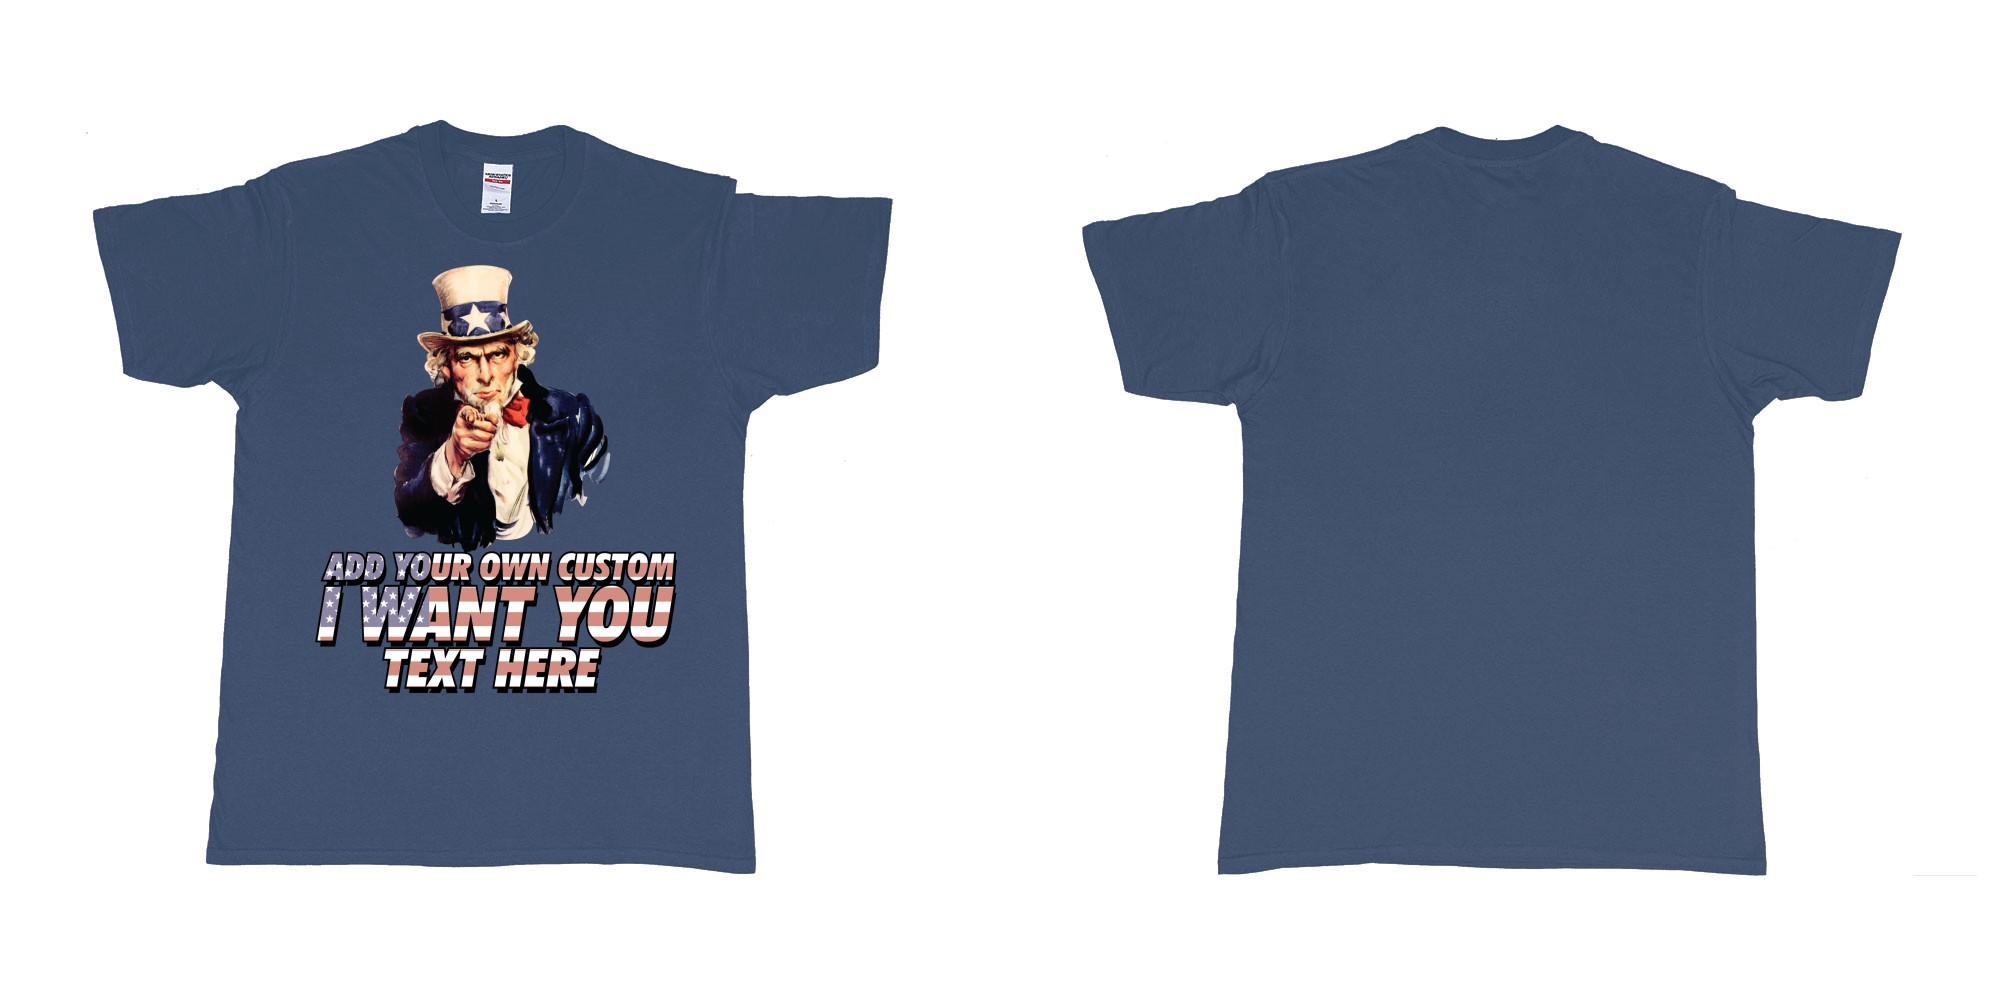 Custom tshirt design uncle sam i want you custom design own printing in fabric color navy choice your own text made in Bali by The Pirate Way